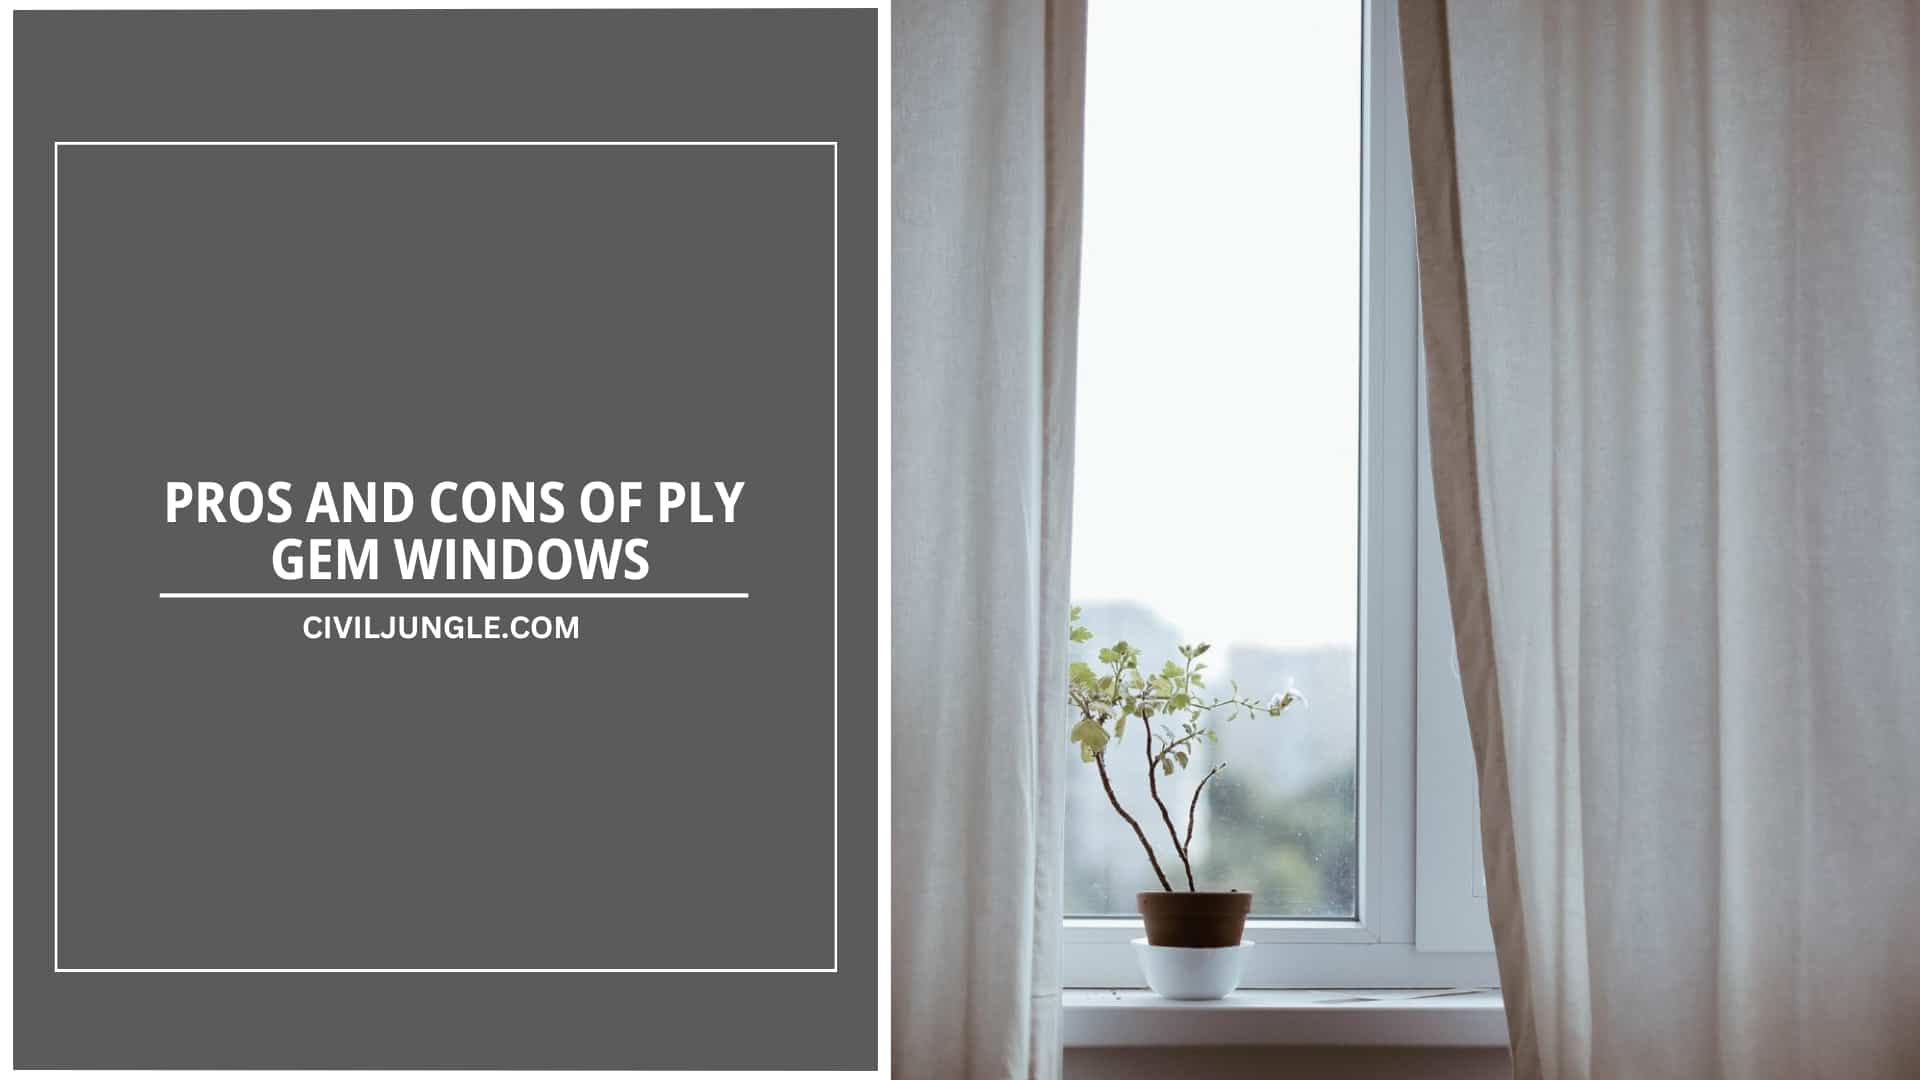 Pros and Cons of Ply Gem Windows